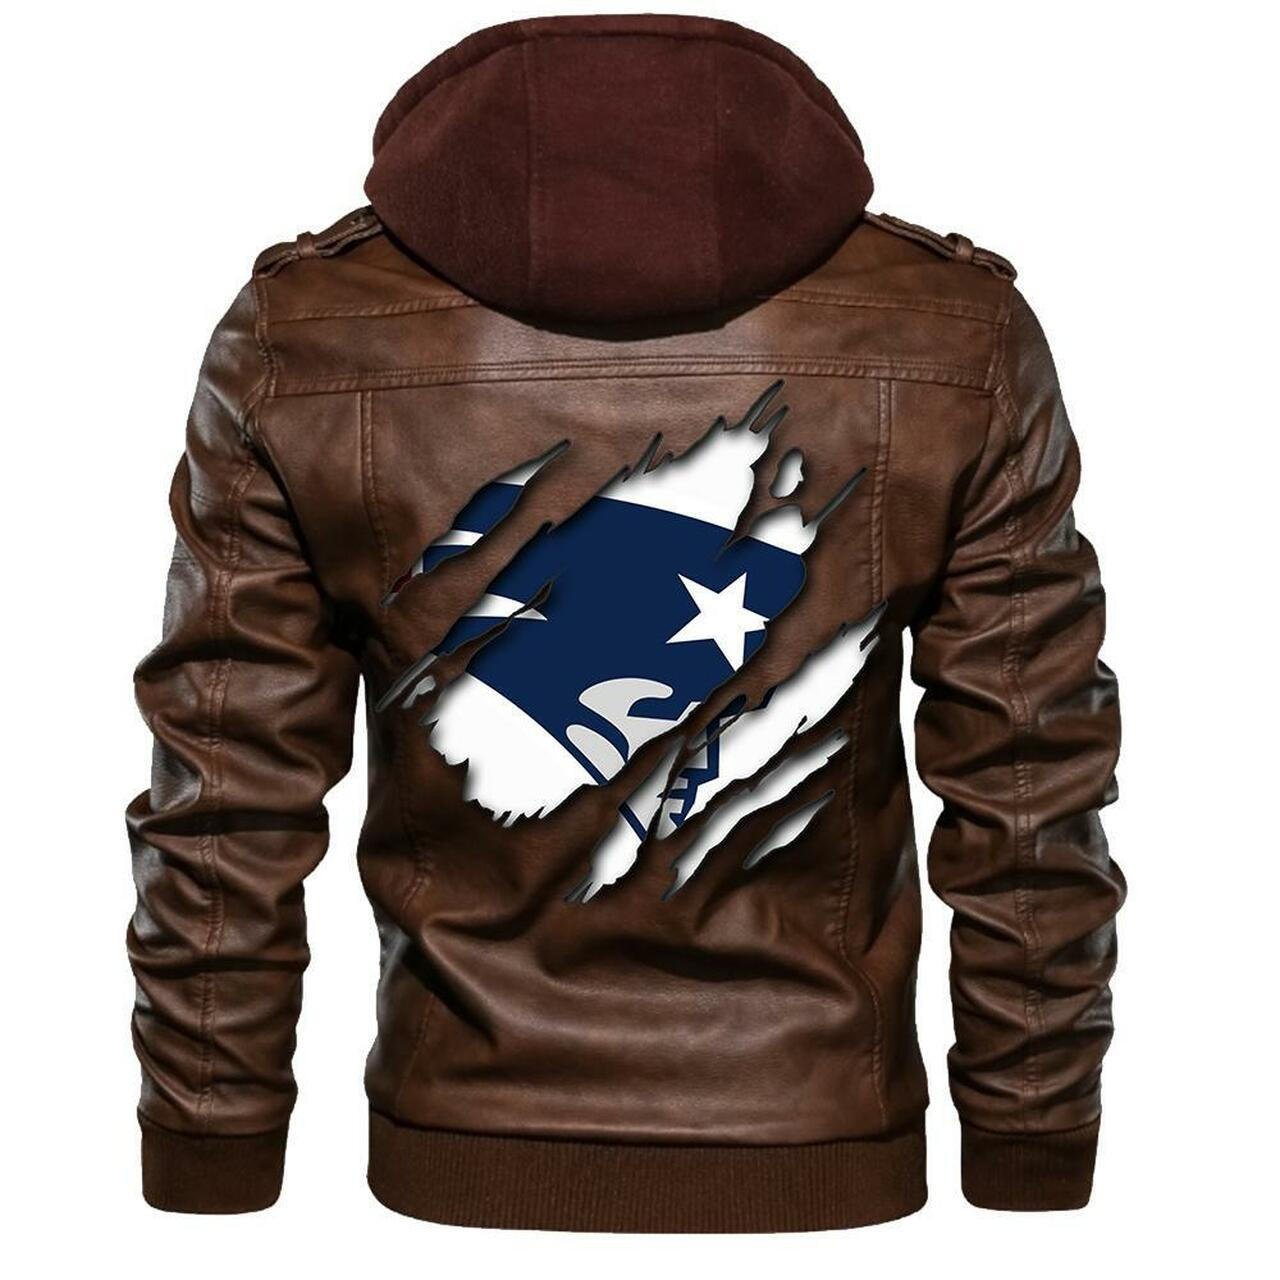 Are you looking for a great leather jacket? 230